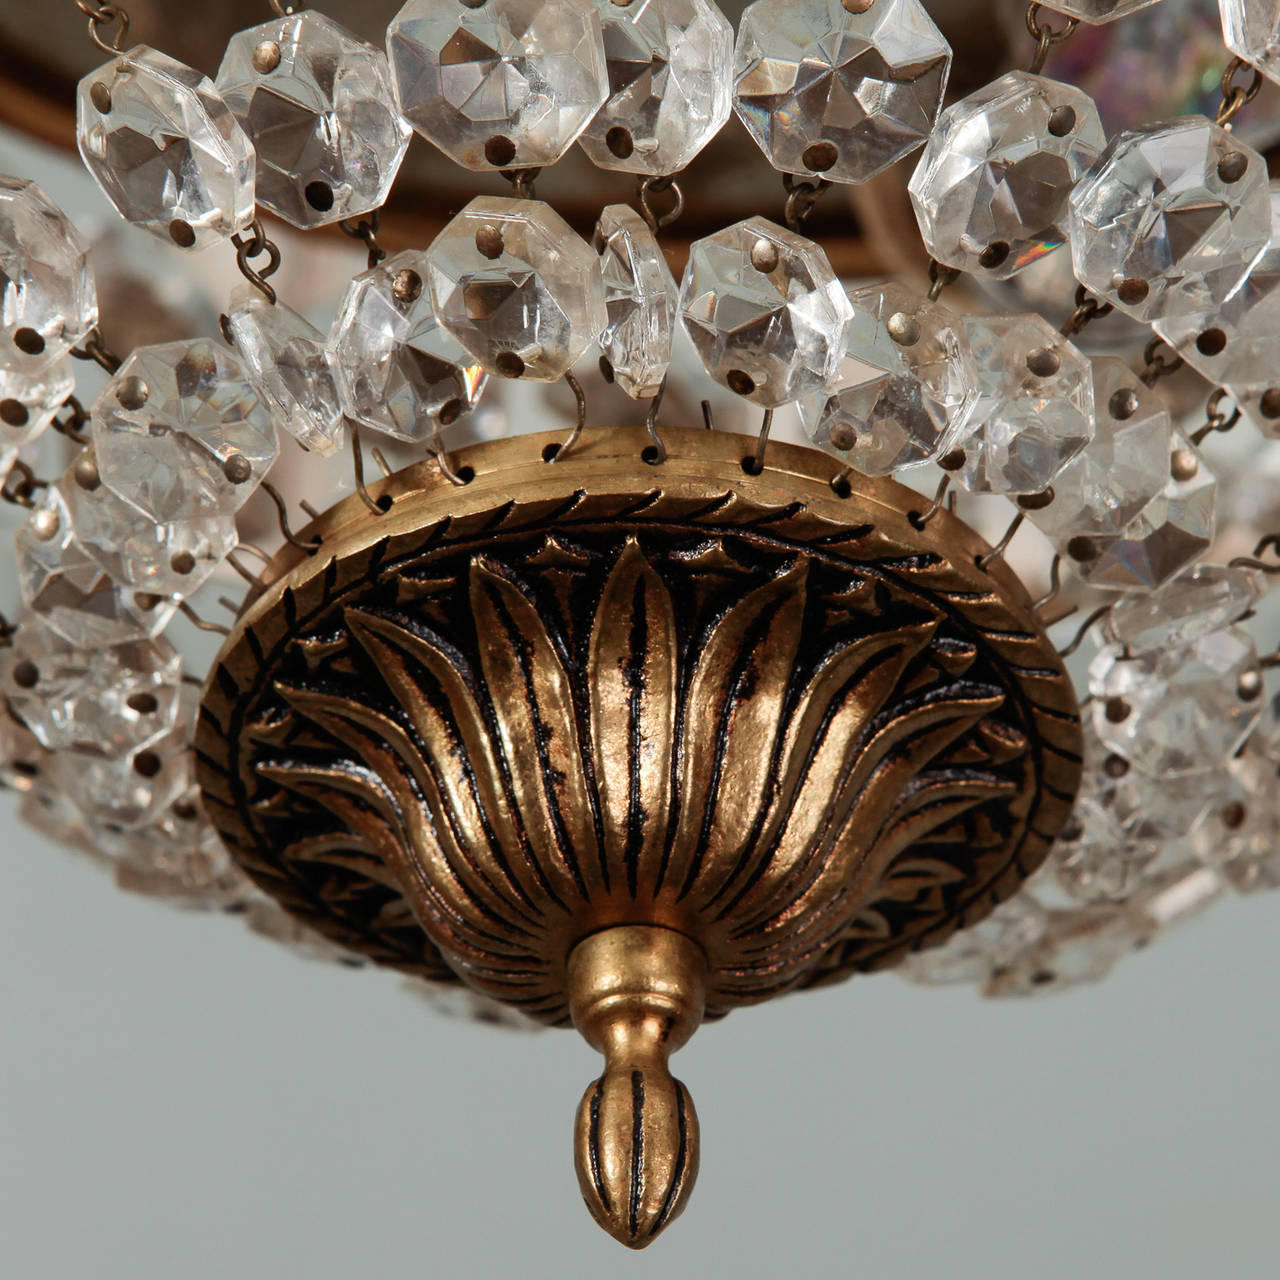 Pair of circa 1930s brass and crystal flush mount light fixtures. Found in France, these fixtures have a decorative dark brass frame and rim that supports faceted crystals strung in basket shape. New wiring for US electrical standards. Sold and